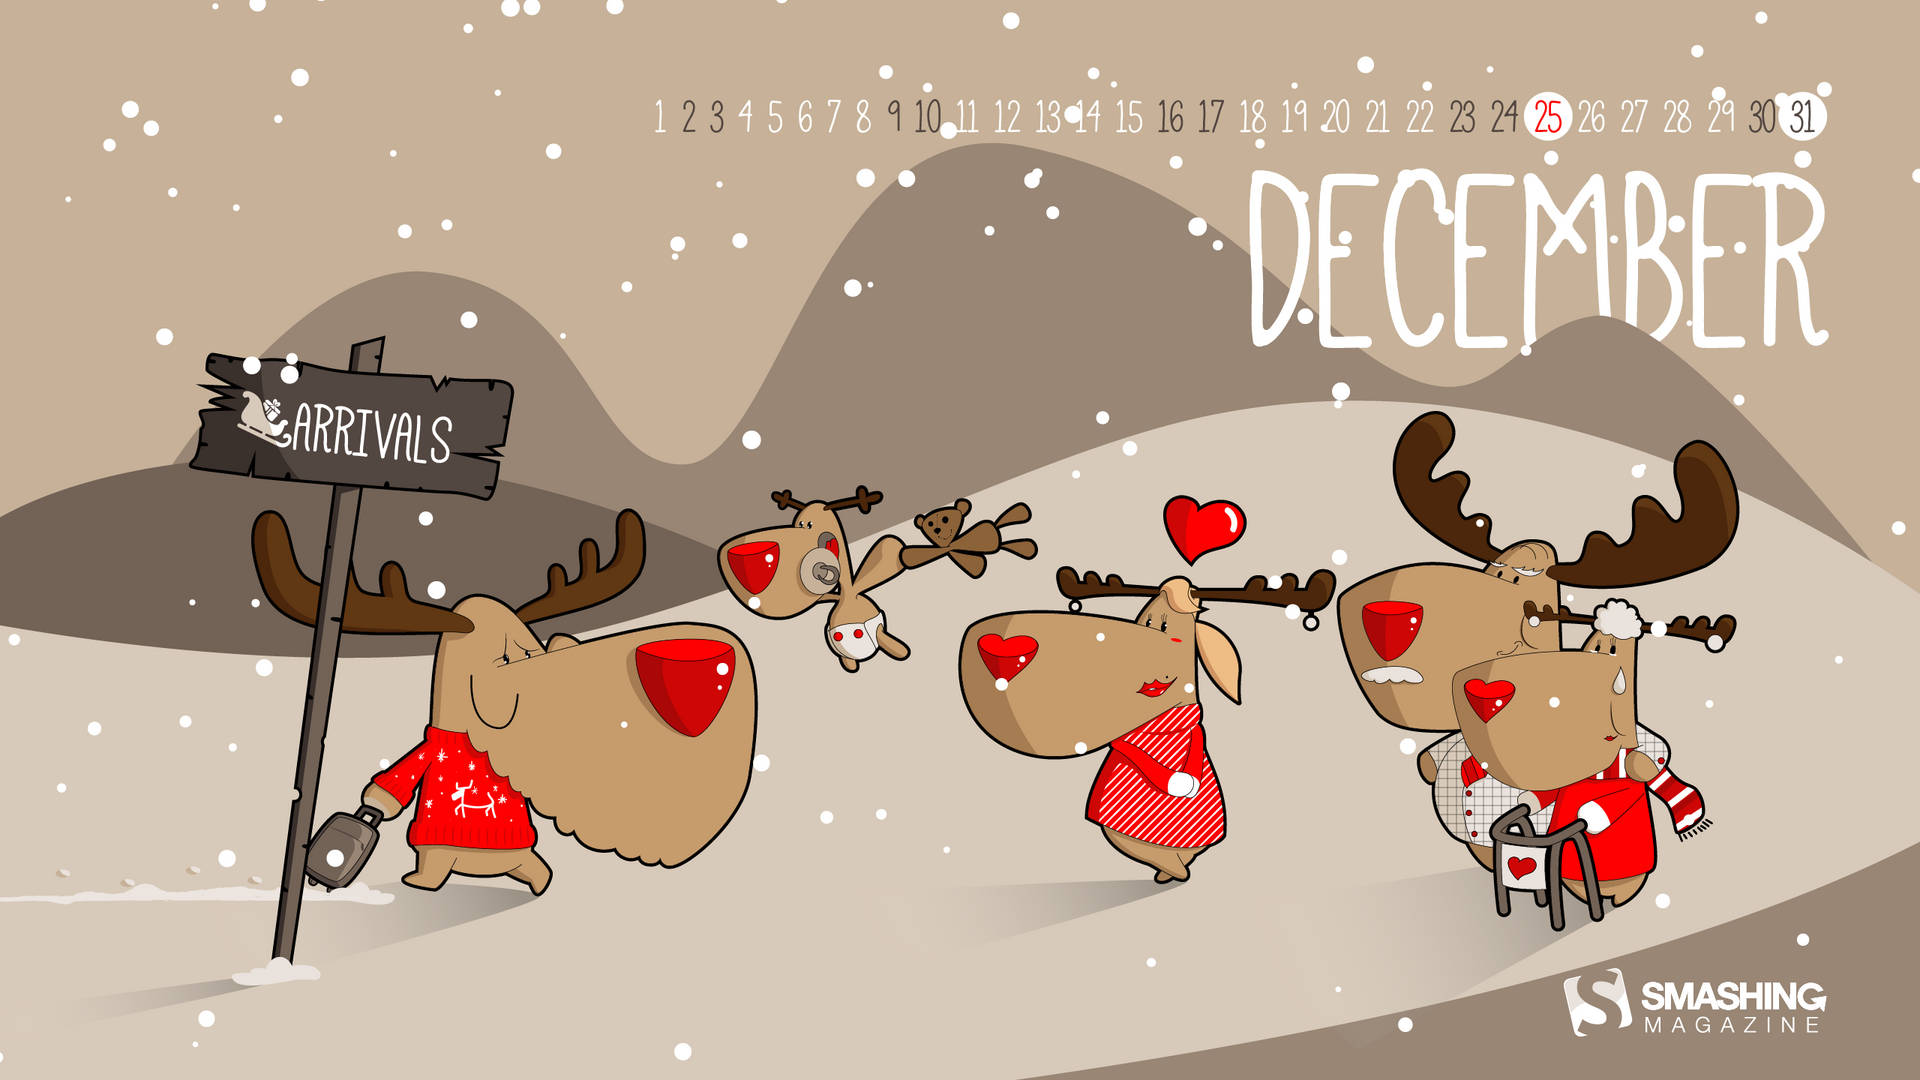 Deck Your December Desktop With This Cheerful Wallpaper! Background